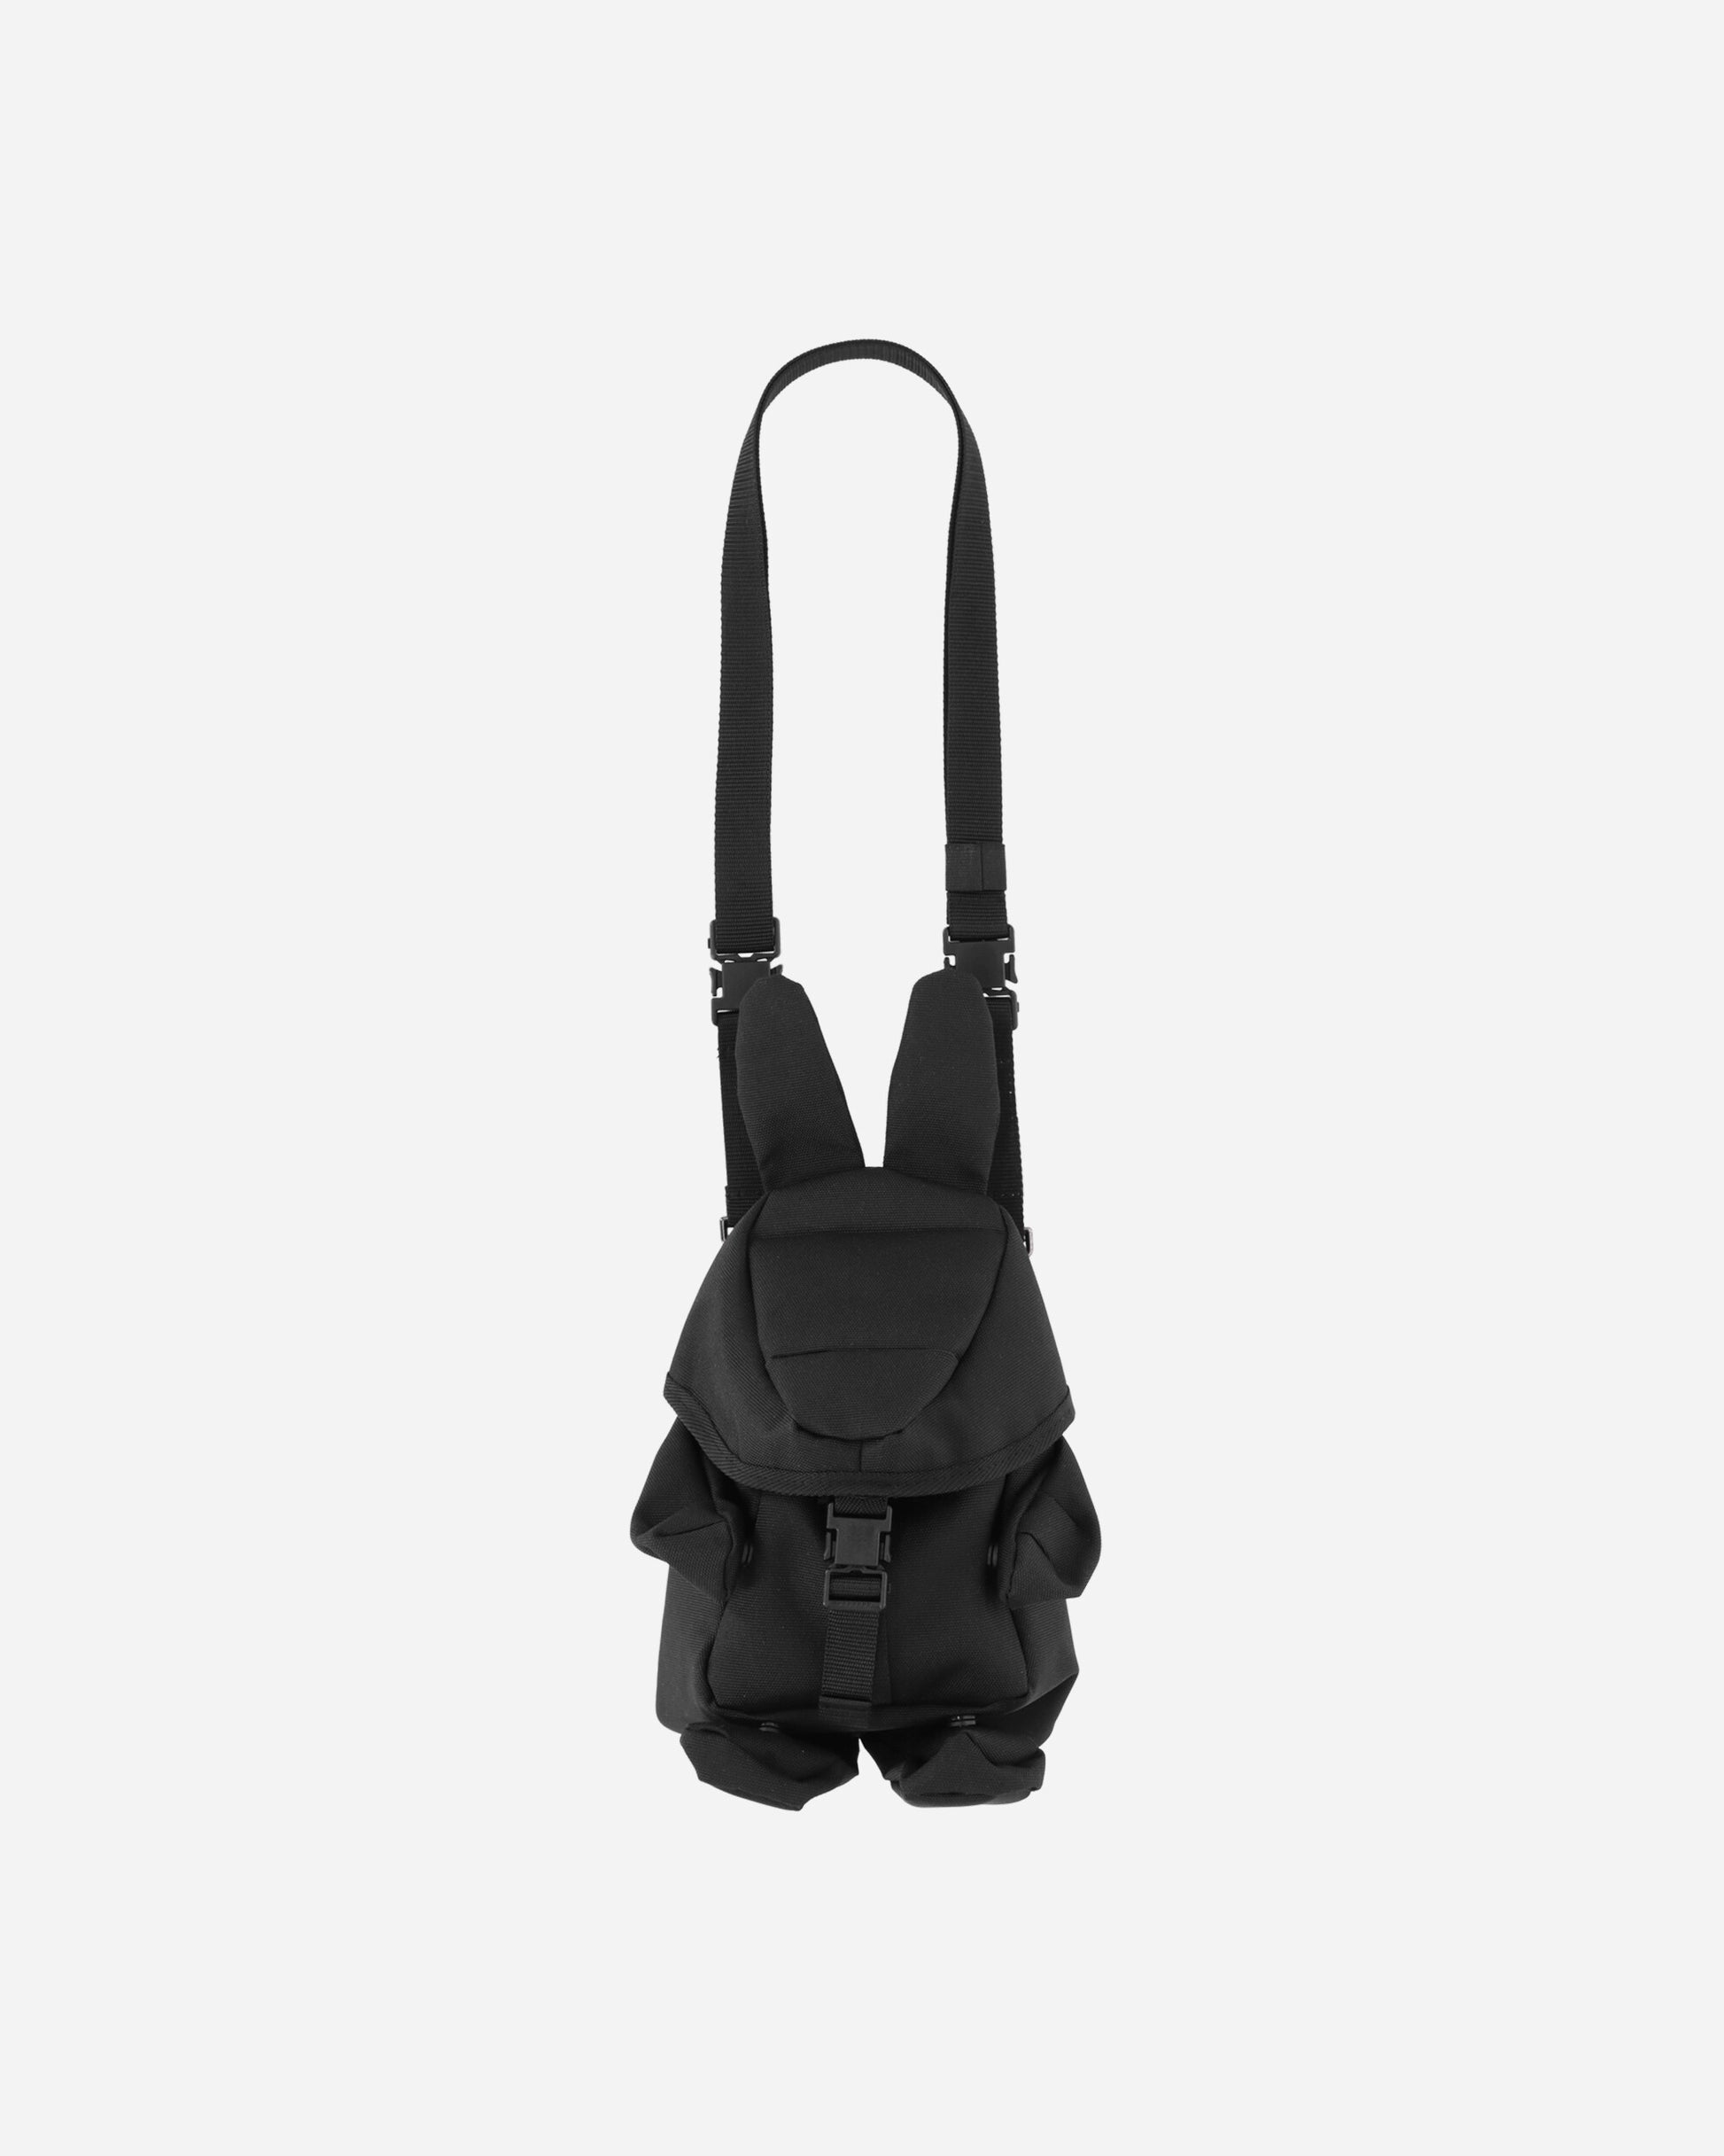 Phingerin Rabbit Pouch Black Bags and Backpacks Pouches PD-241-BG-041 C1